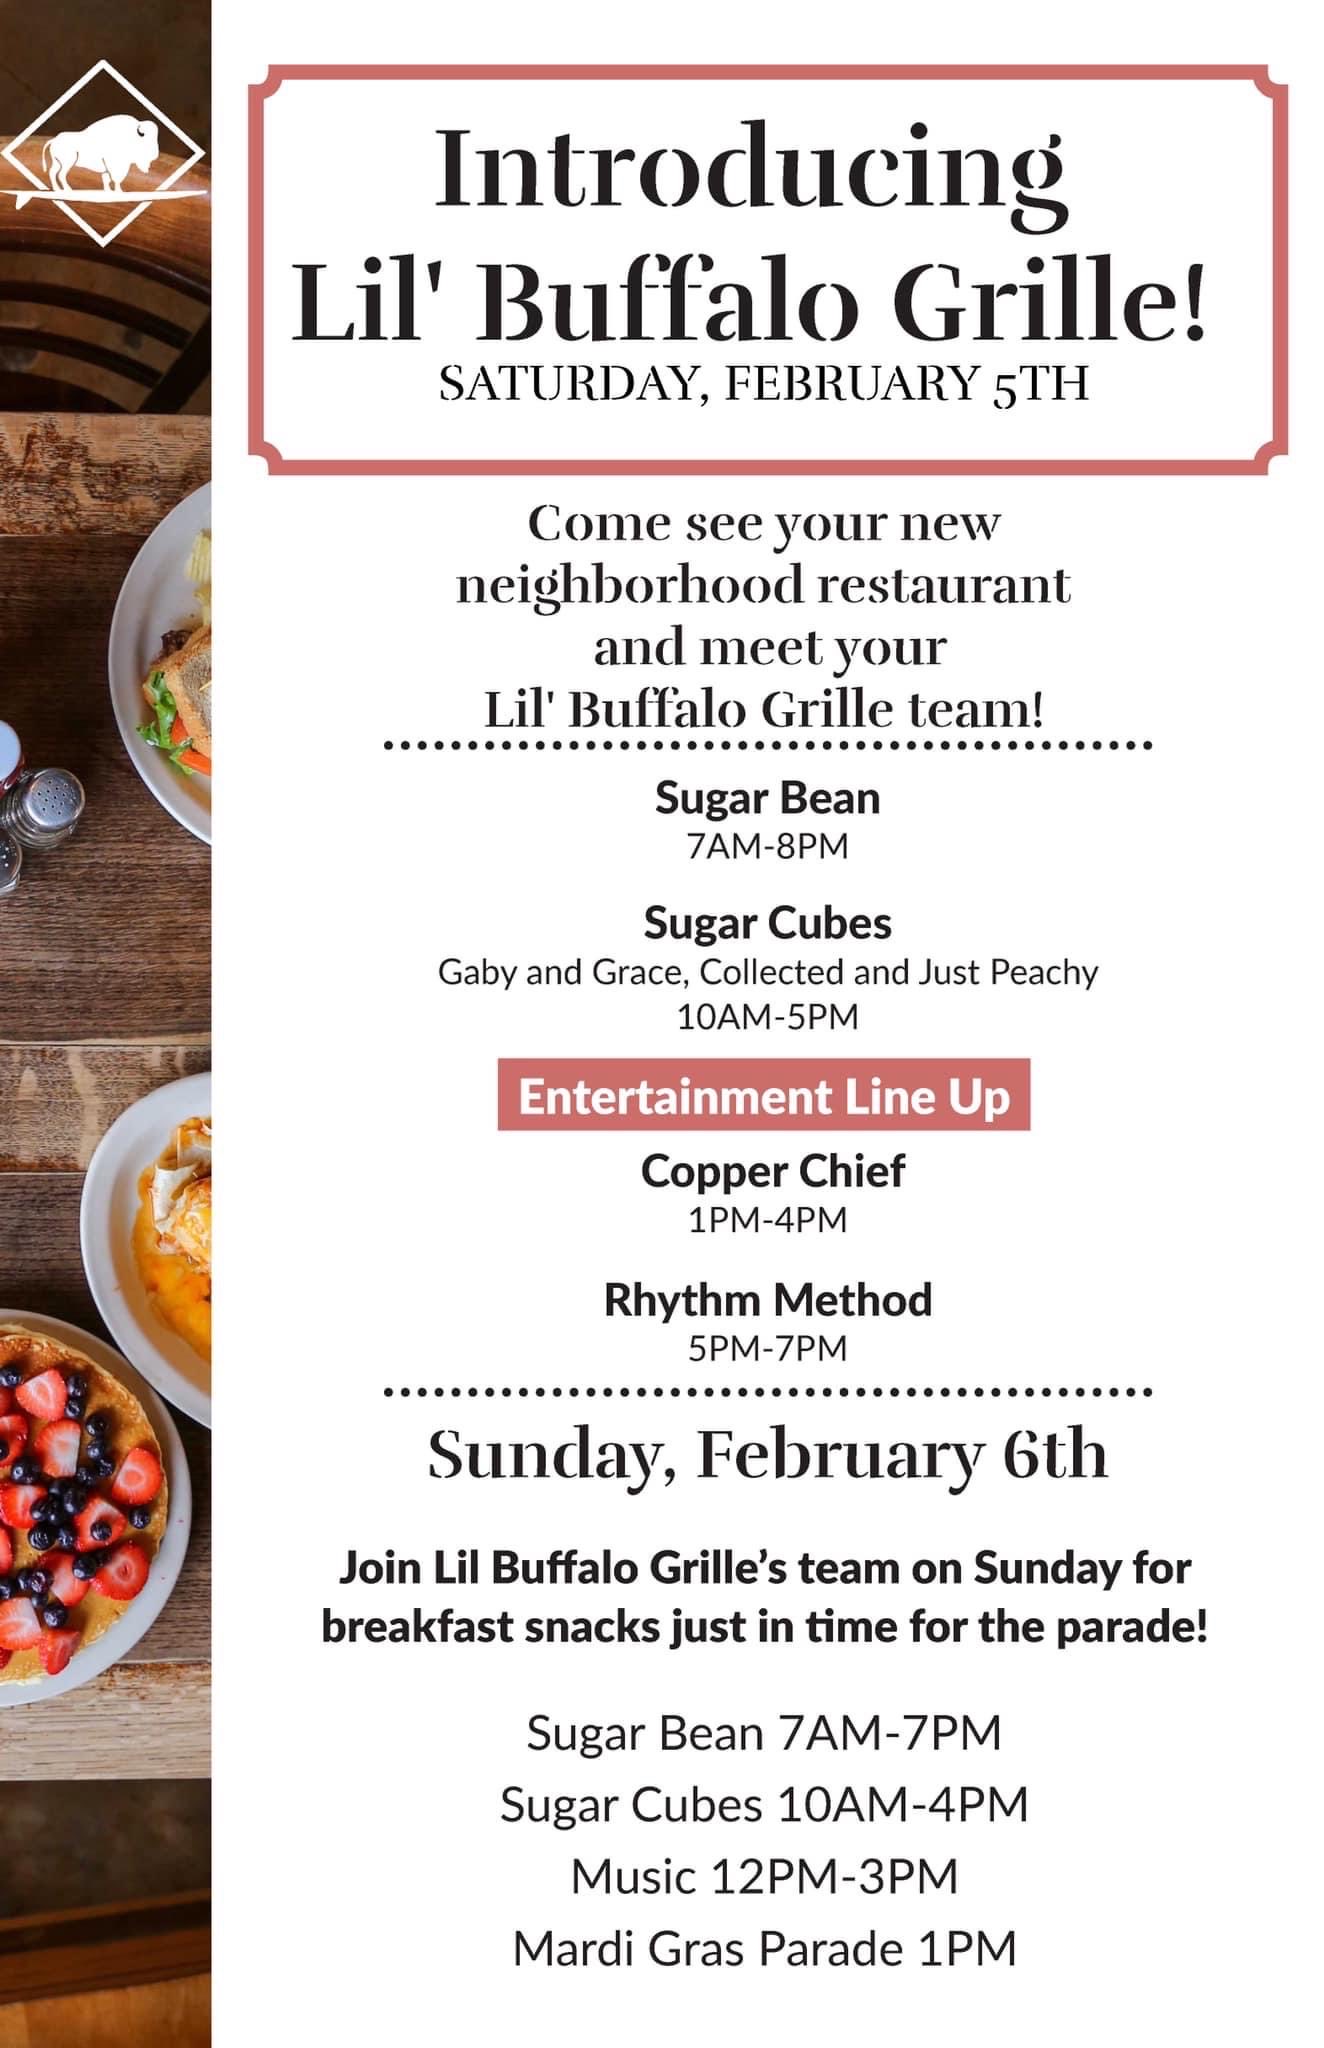 The Buffalo Grille (@BuffaloGrille) / Twitter